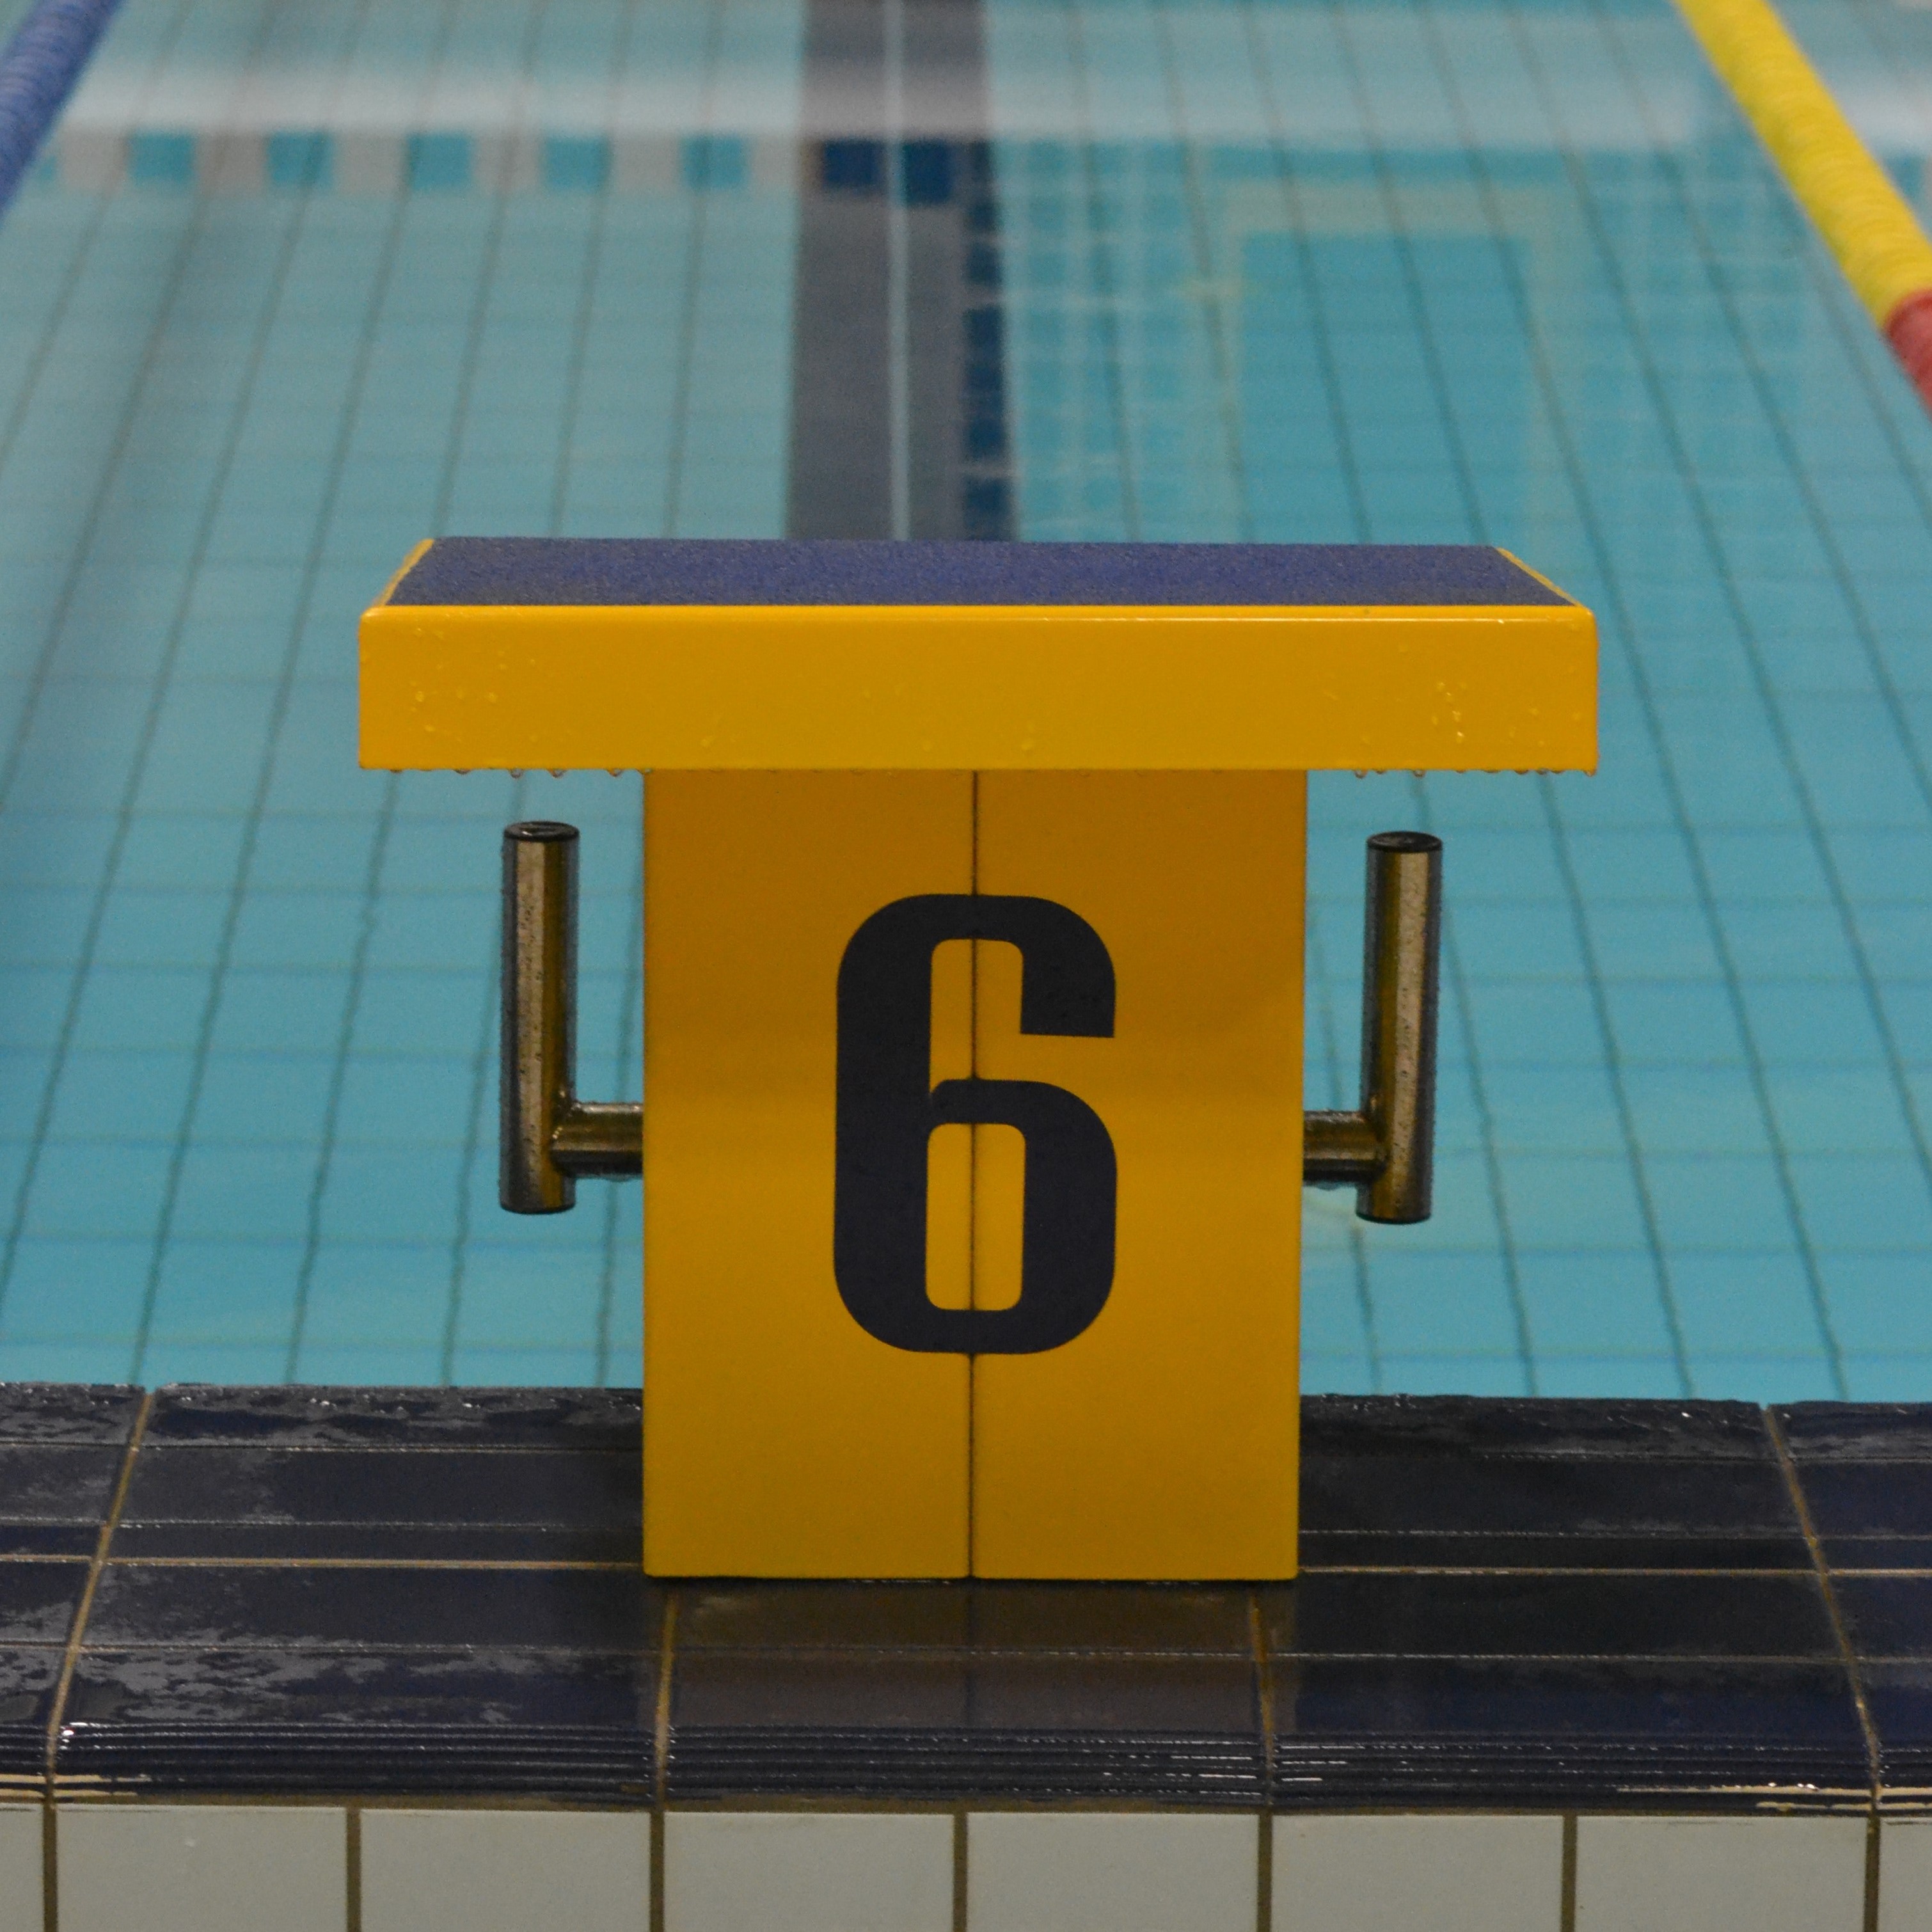 Image Of A Starting Block